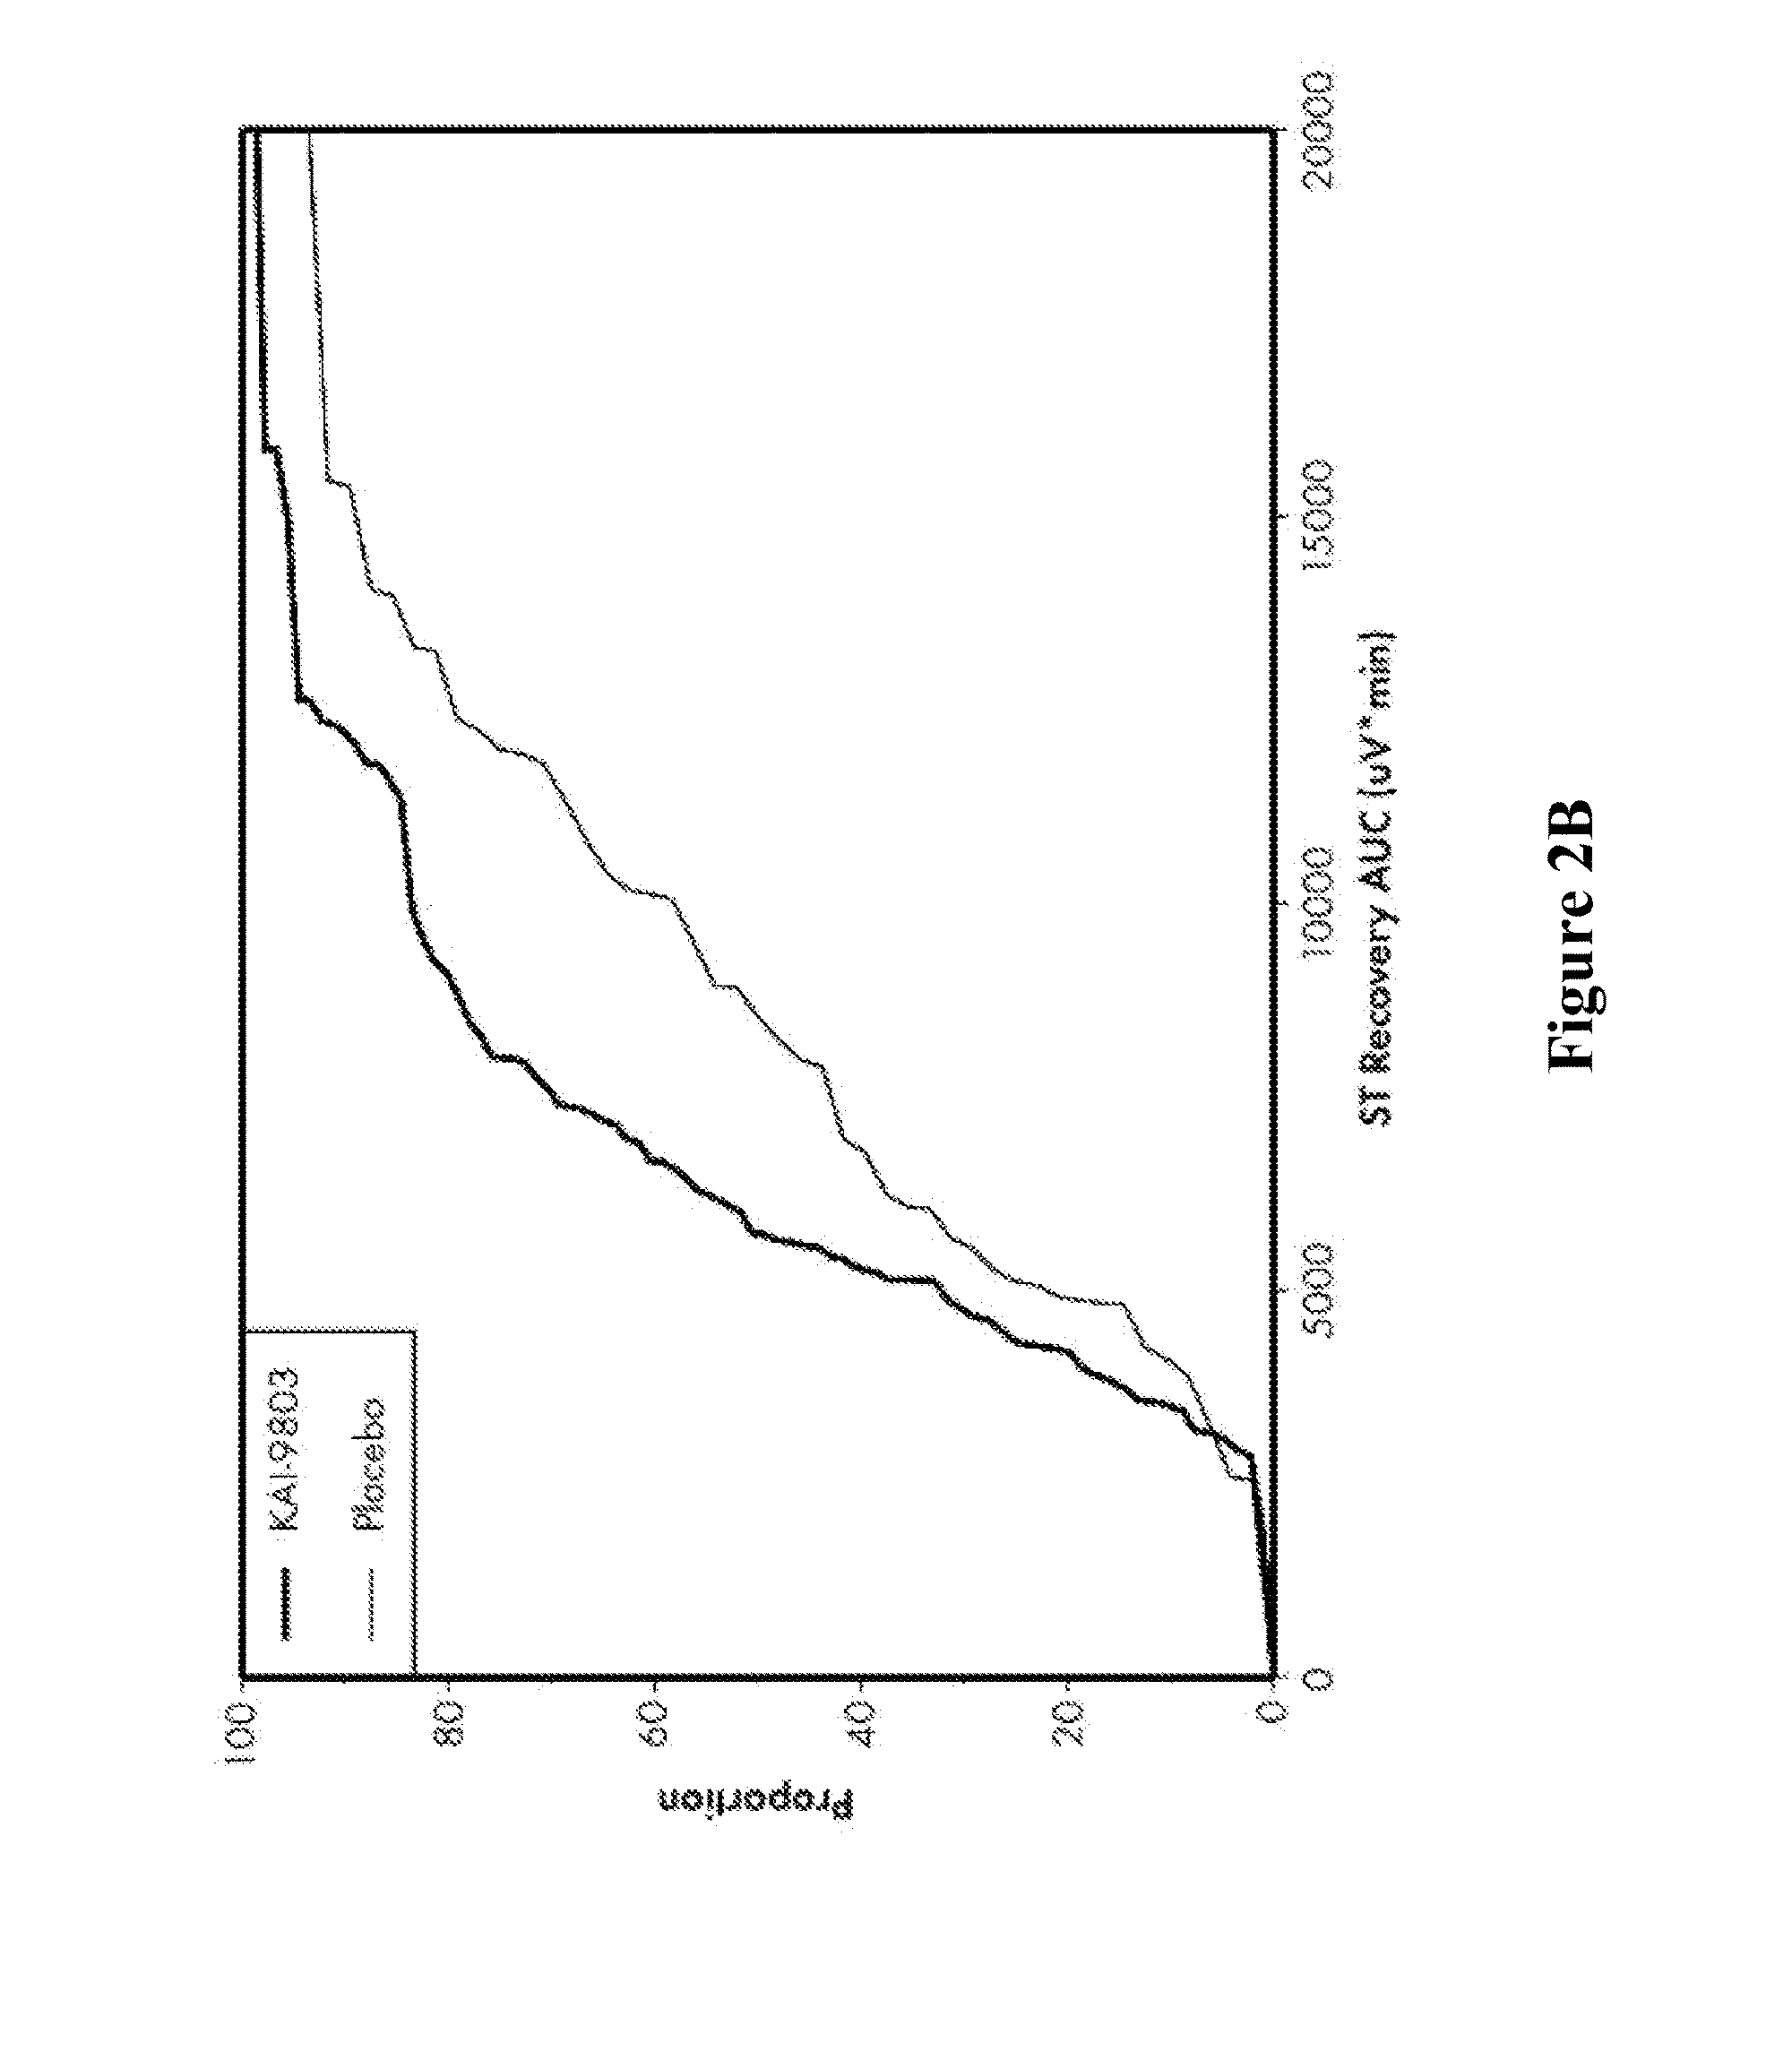 Method of treating acute st-elevation myocardial infarction with a delta pkc antagonist